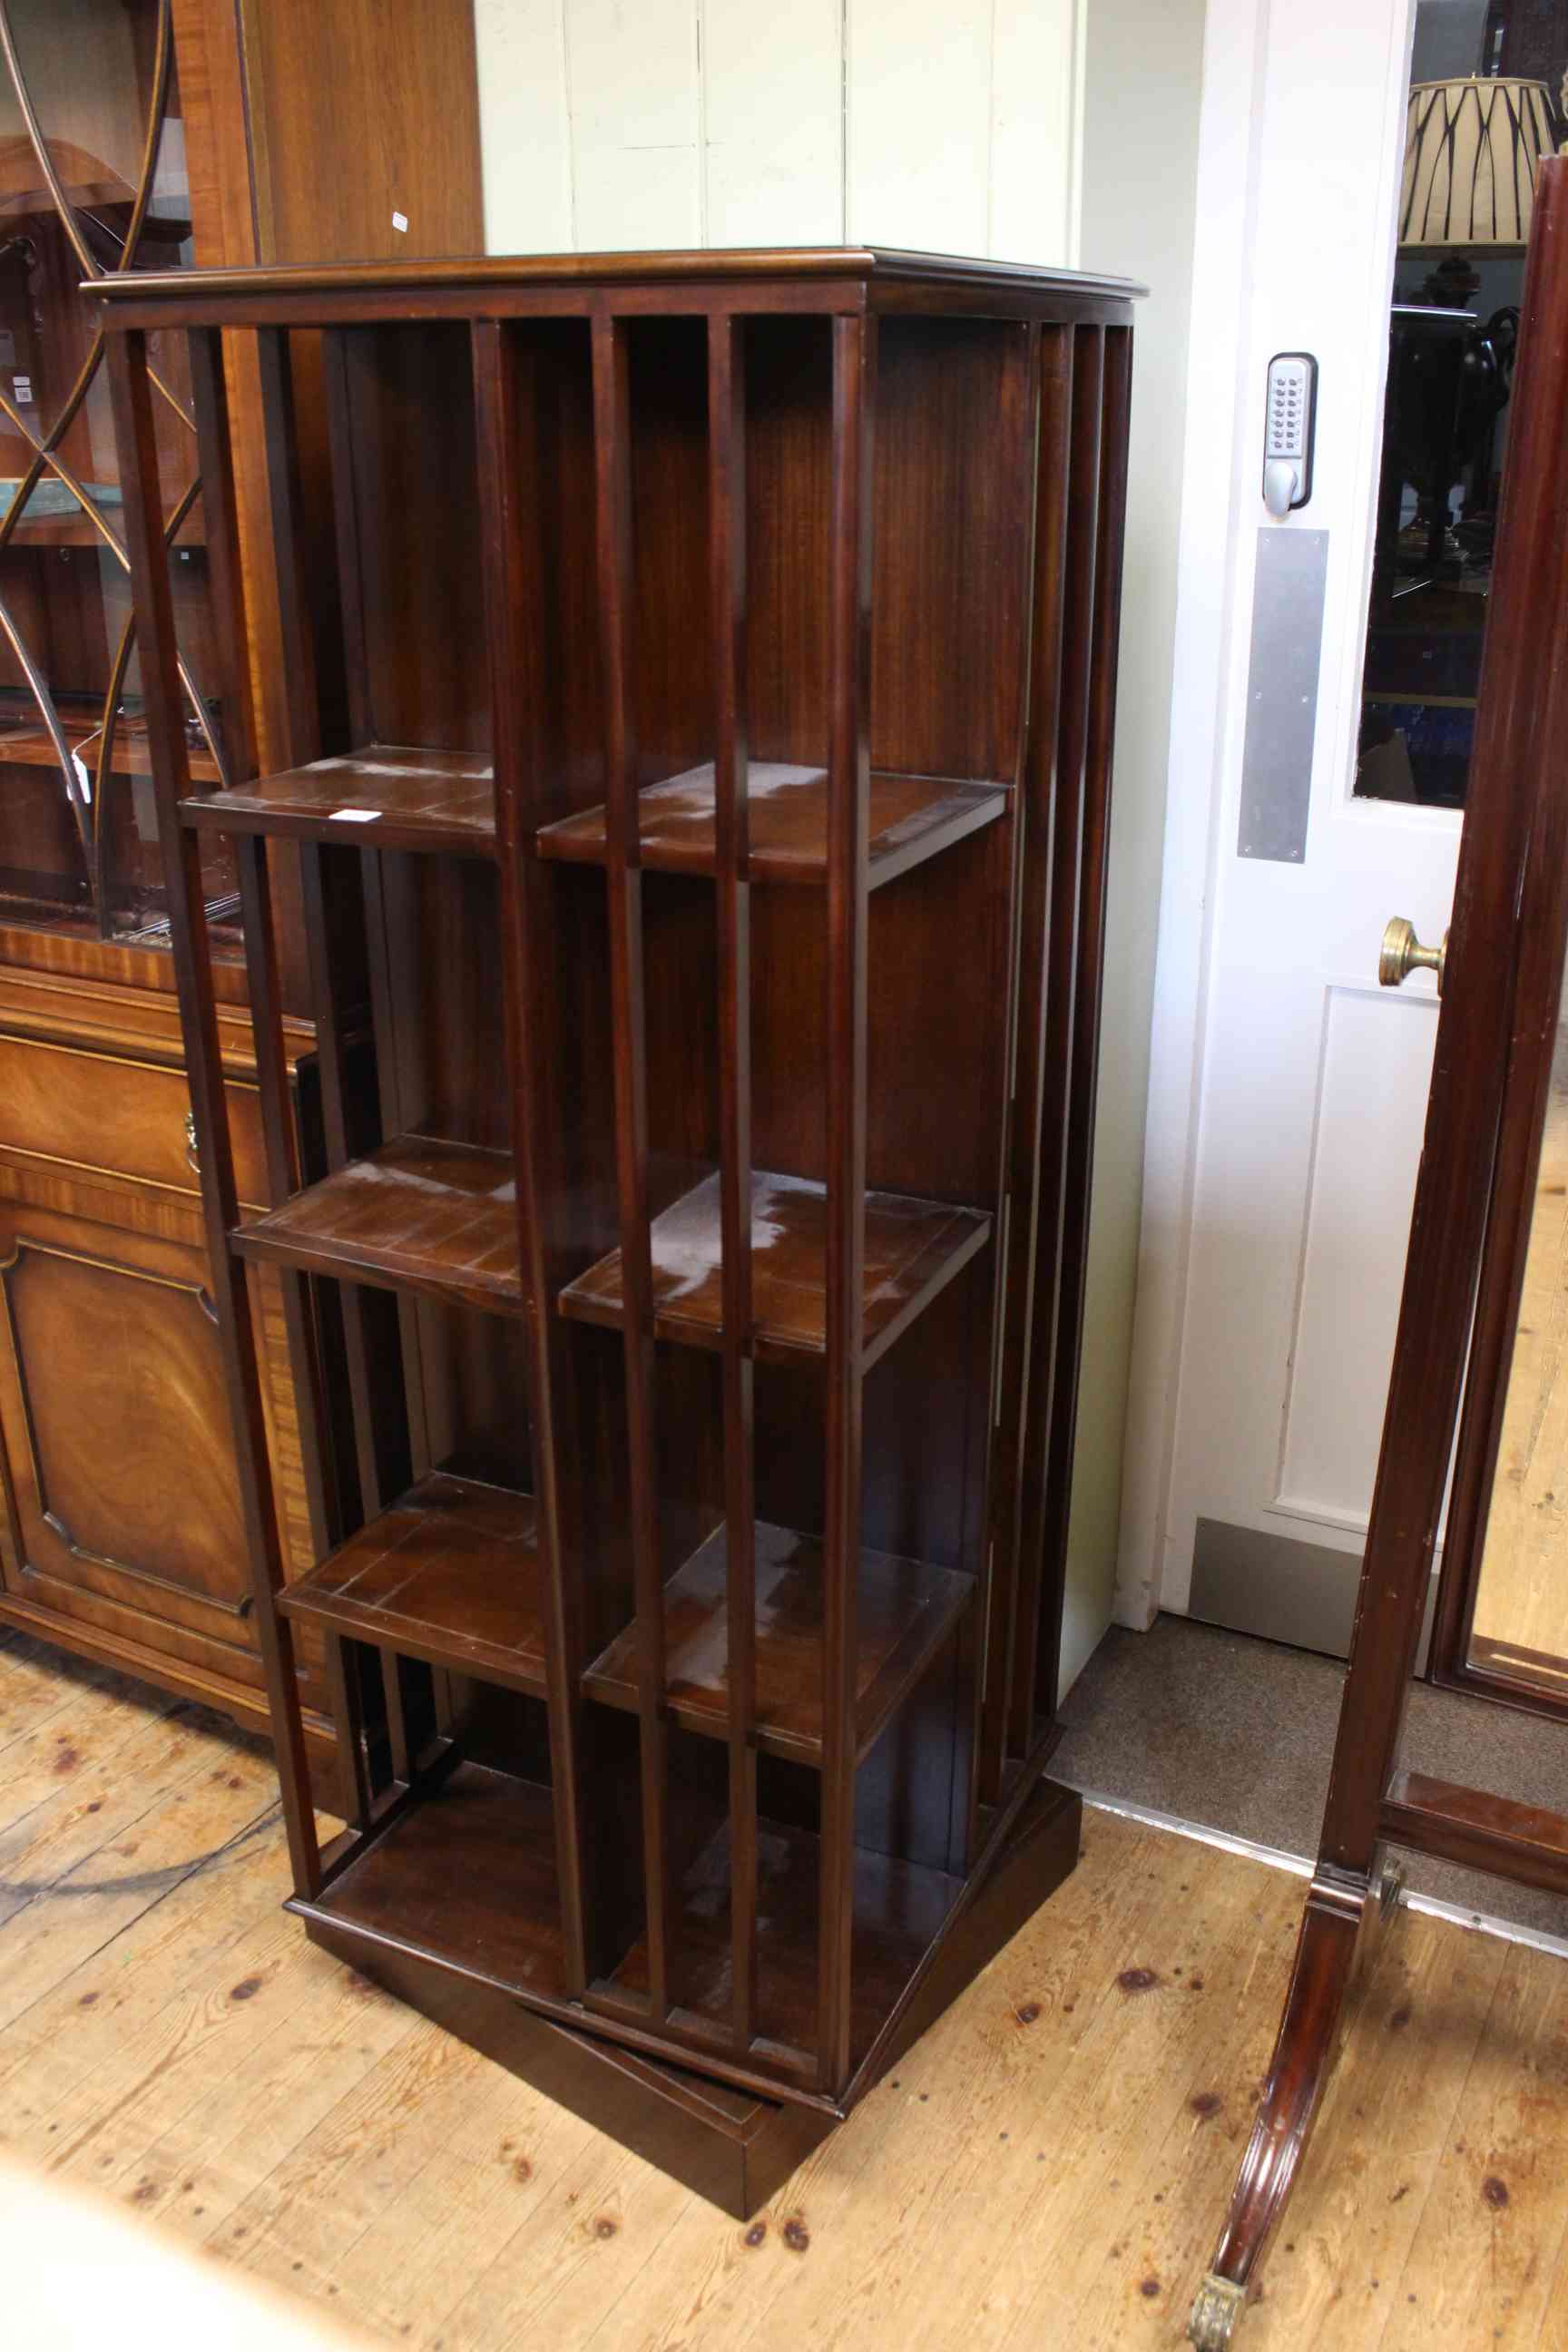 Mahogany four tier revolving bookcase, 157cm high by 60cm wide.